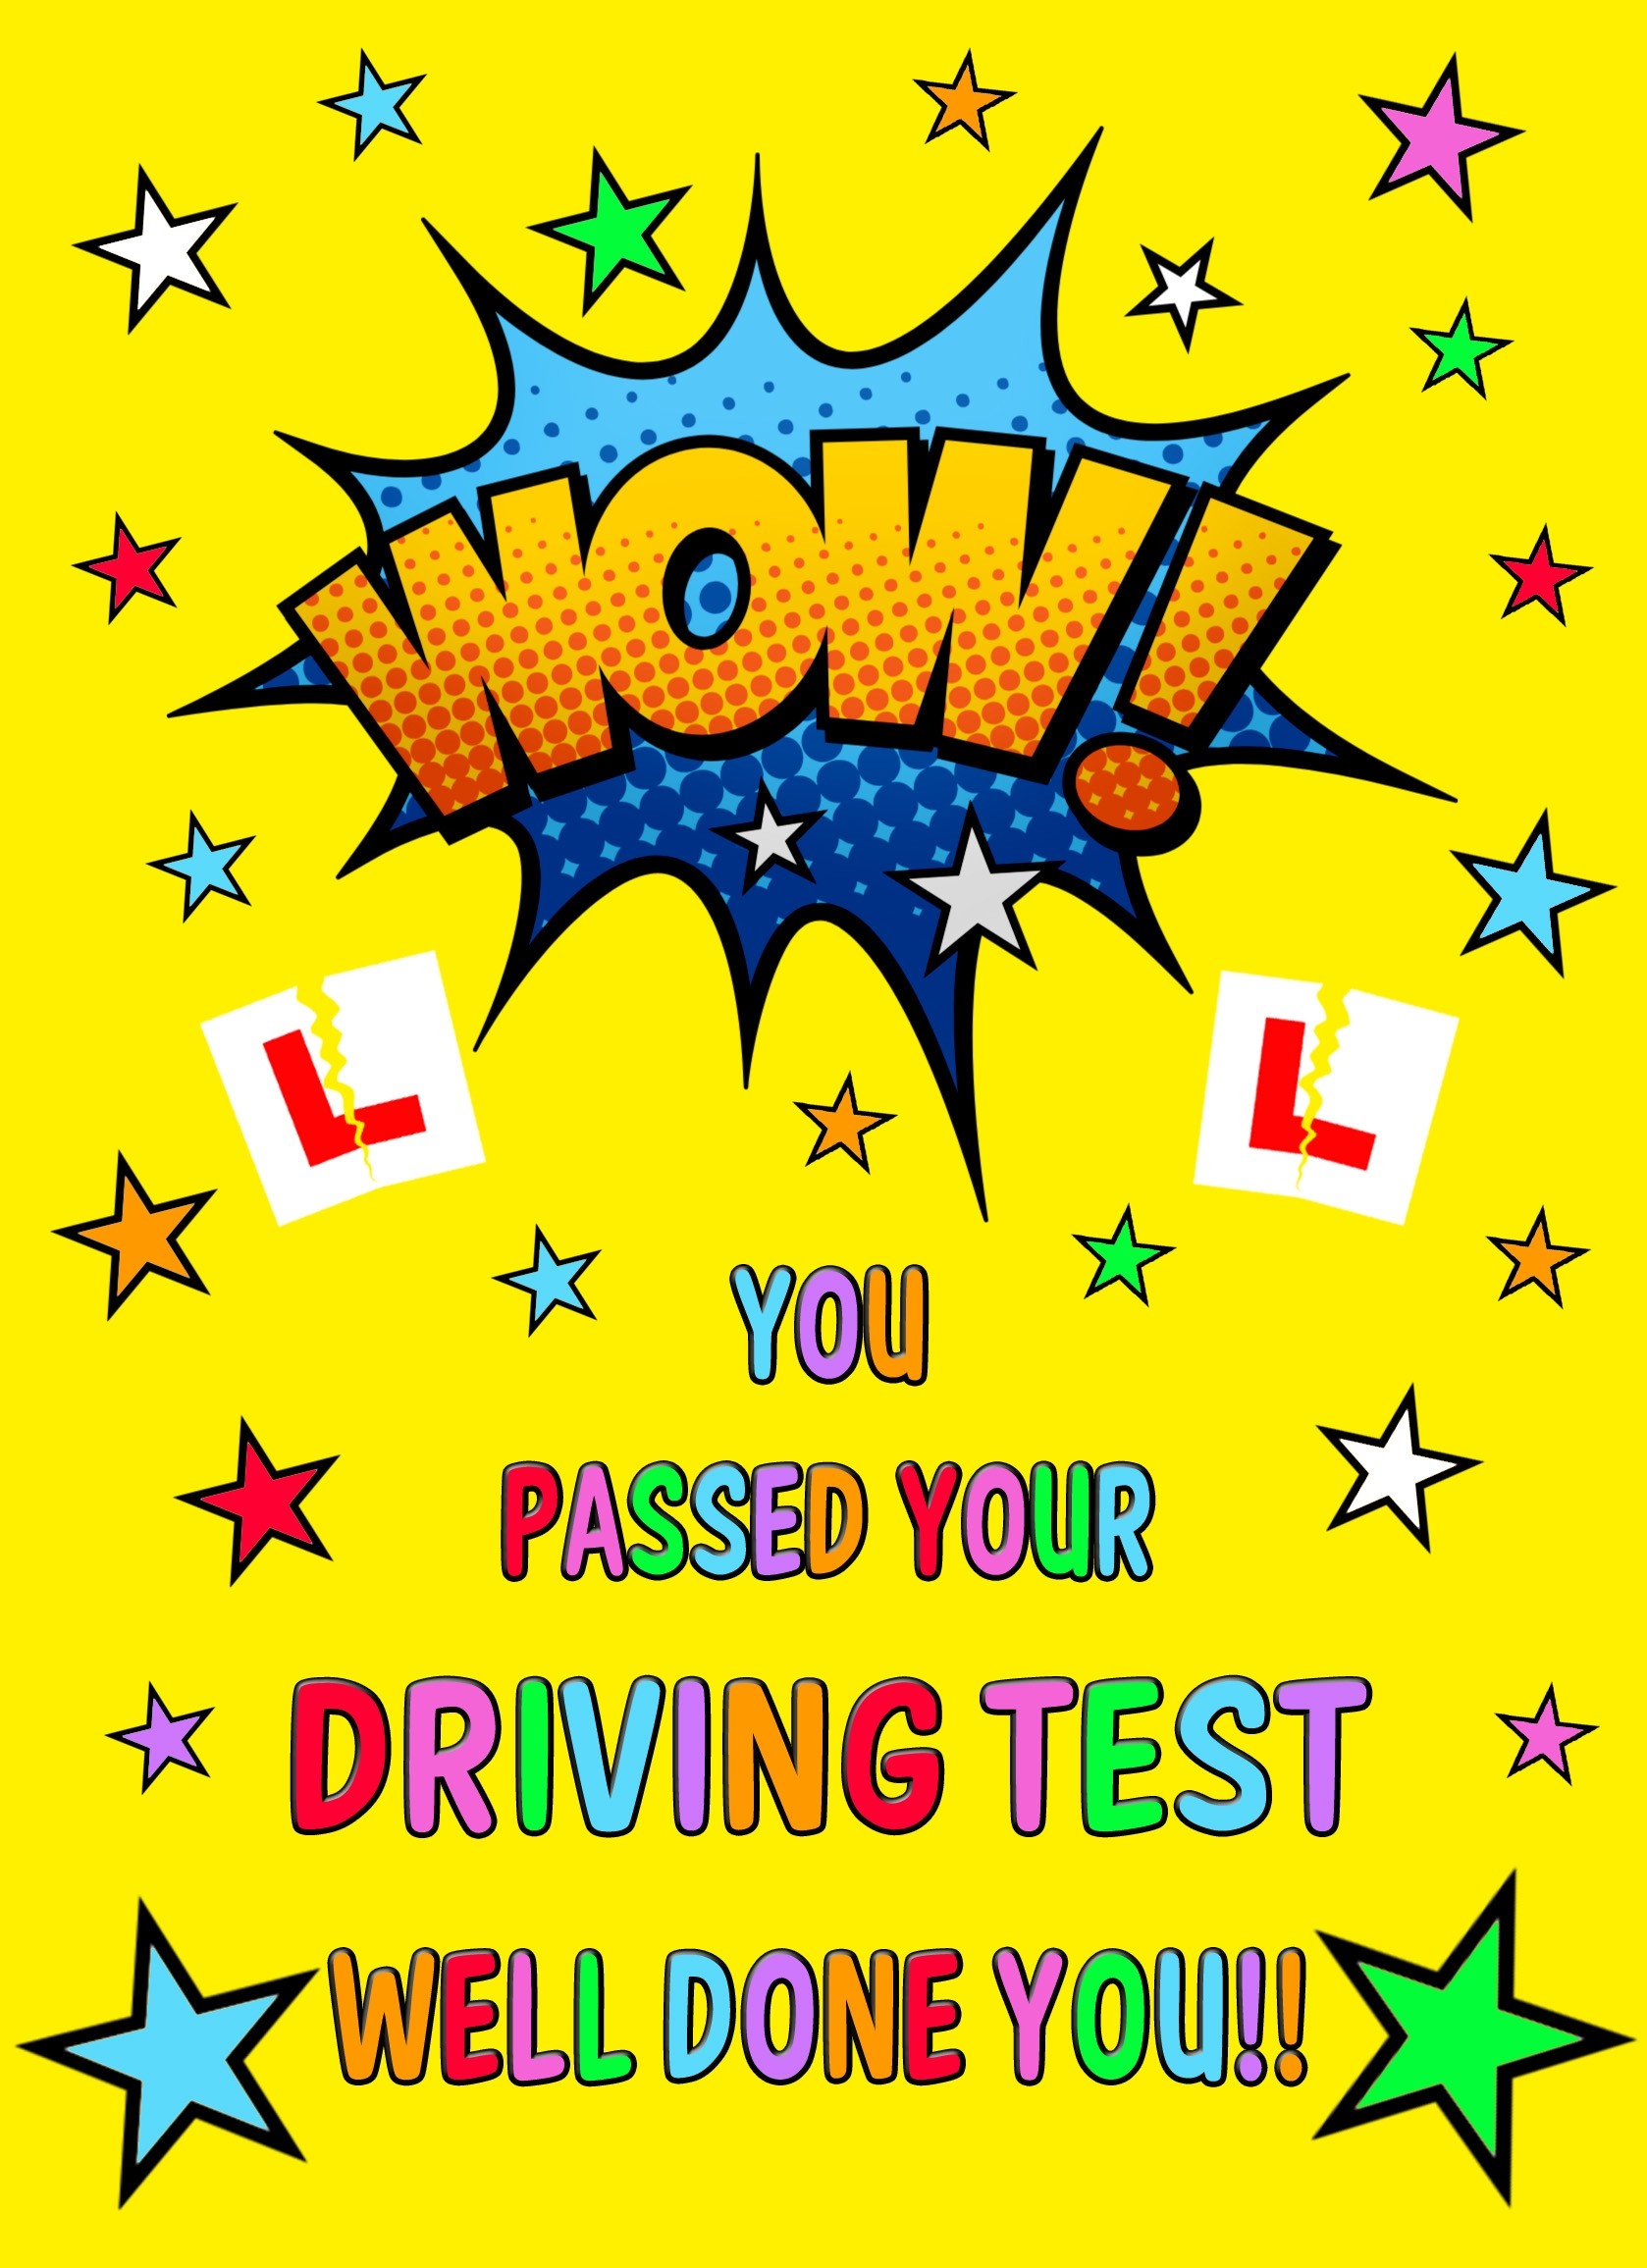 Passed Your Driving Test Card (Well Done, Yellow)